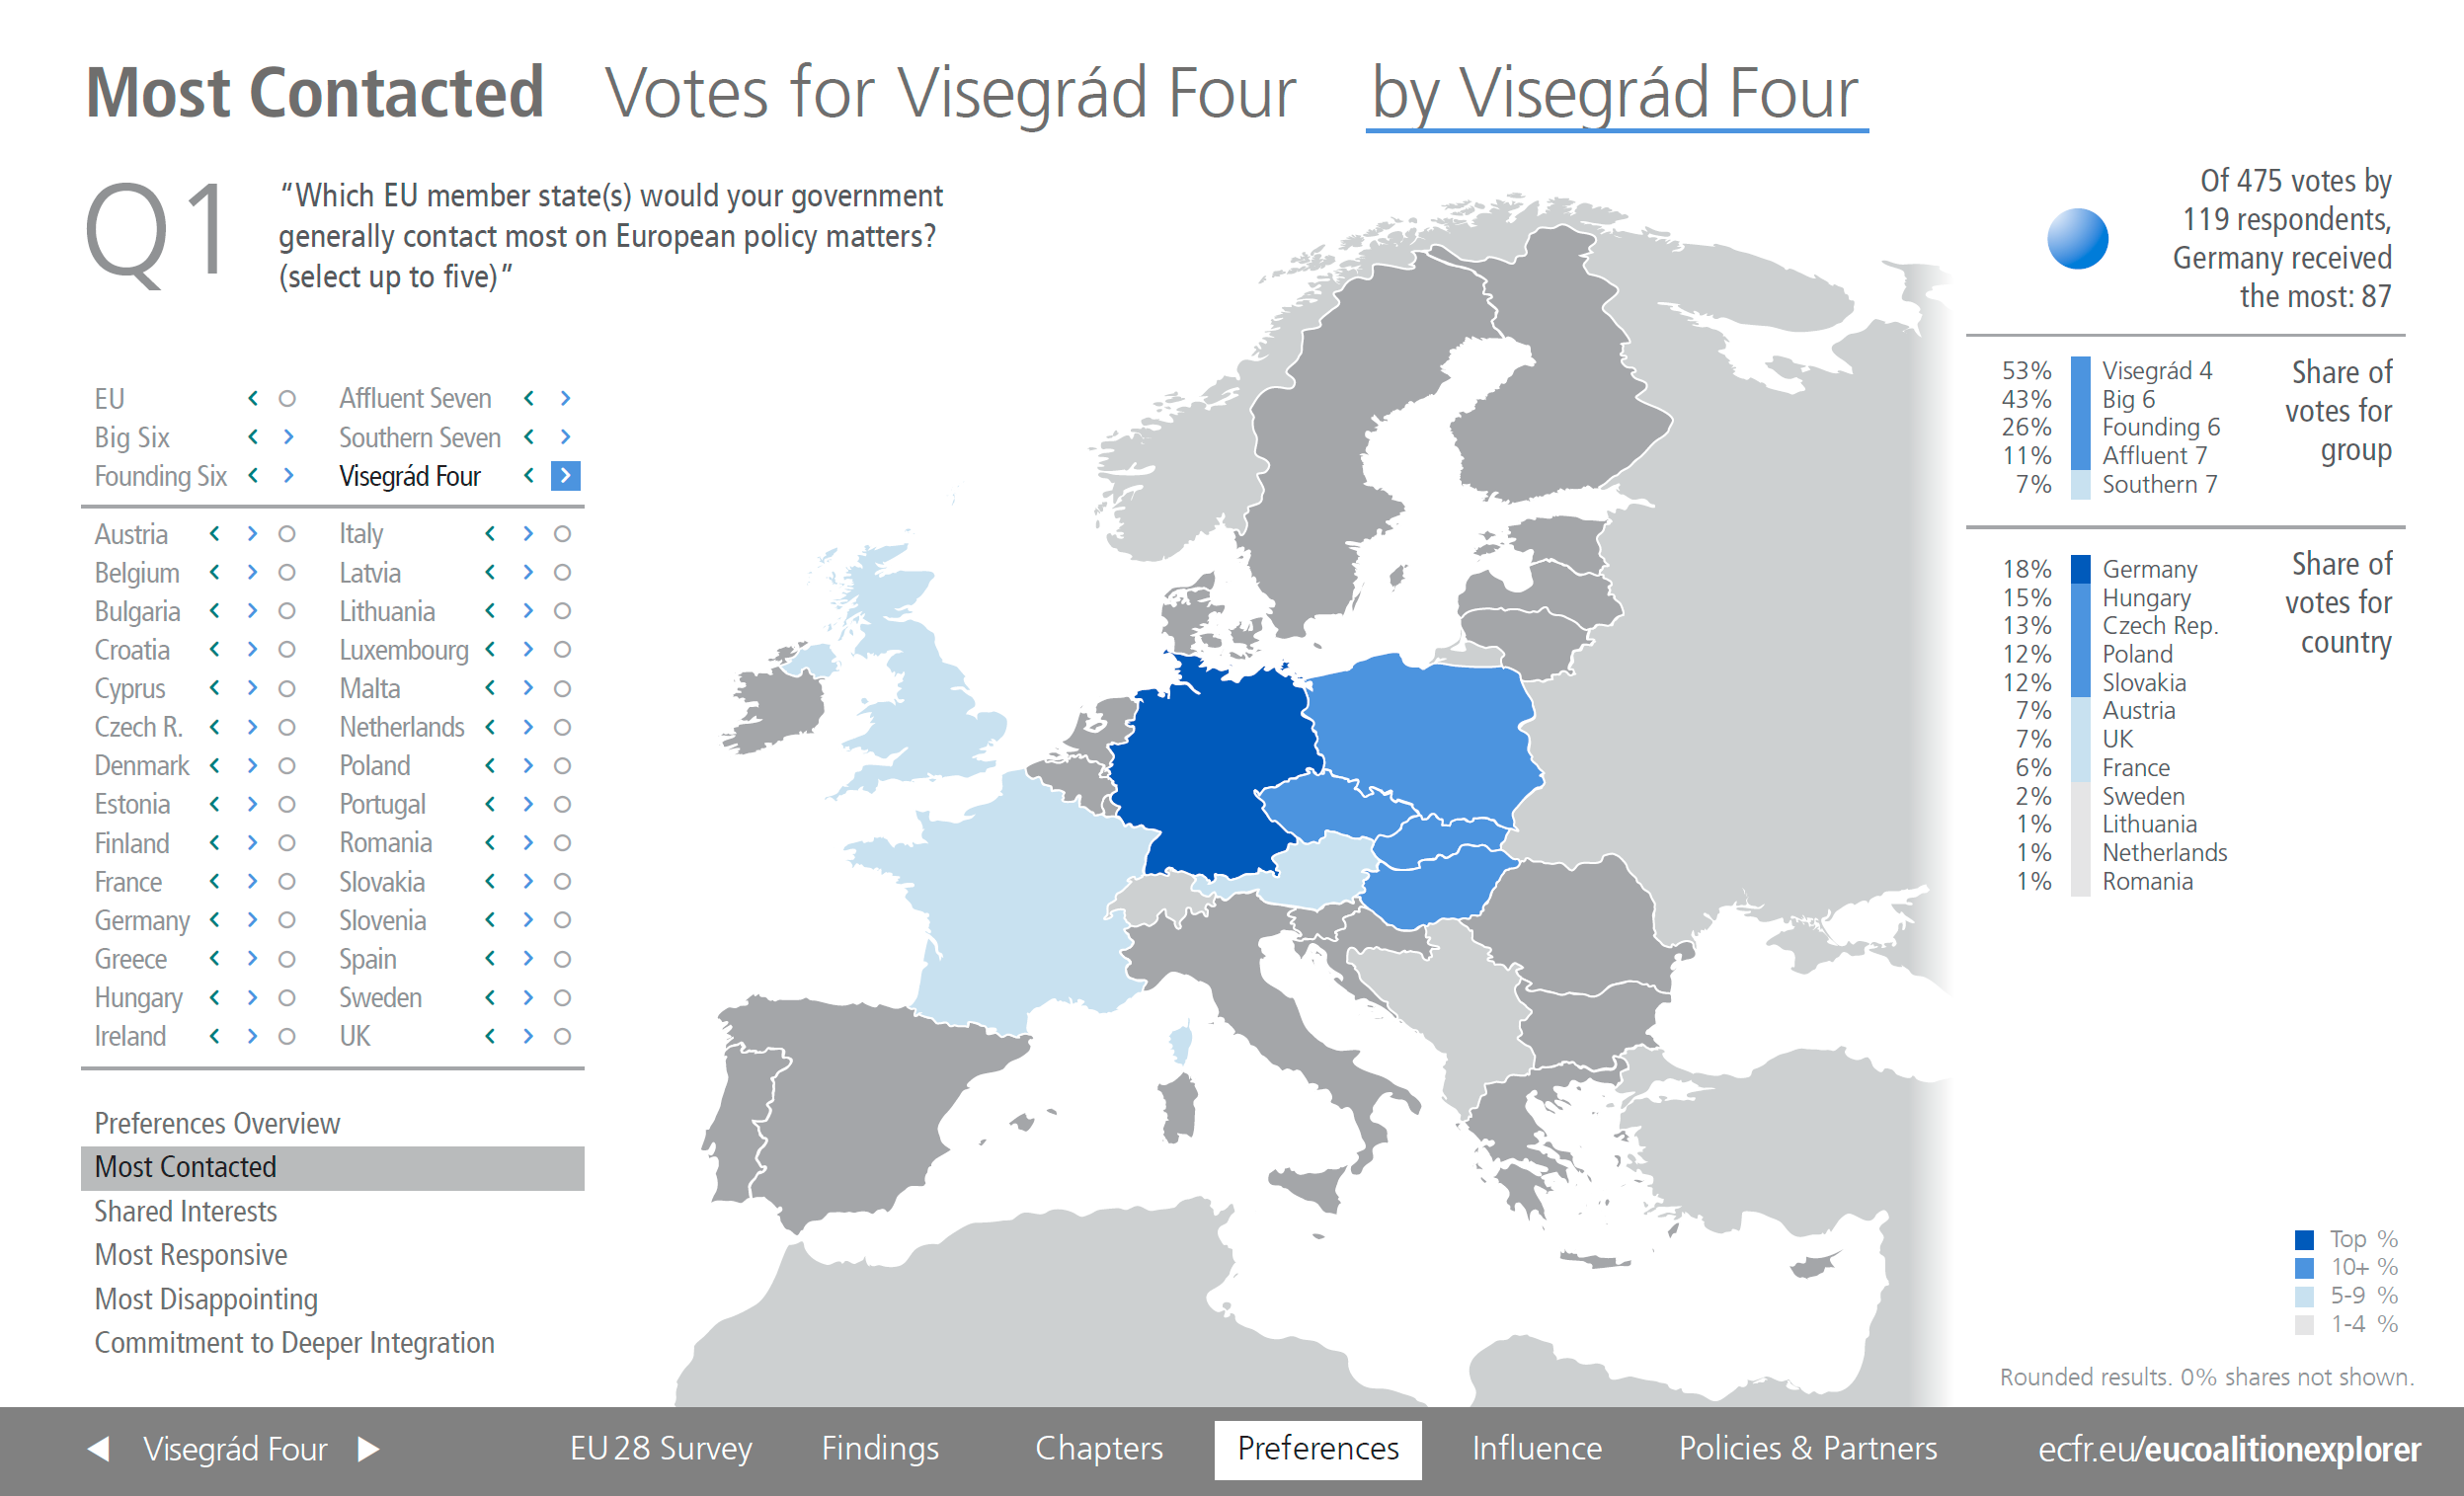 Most contacted EU countries by Visegrad 4